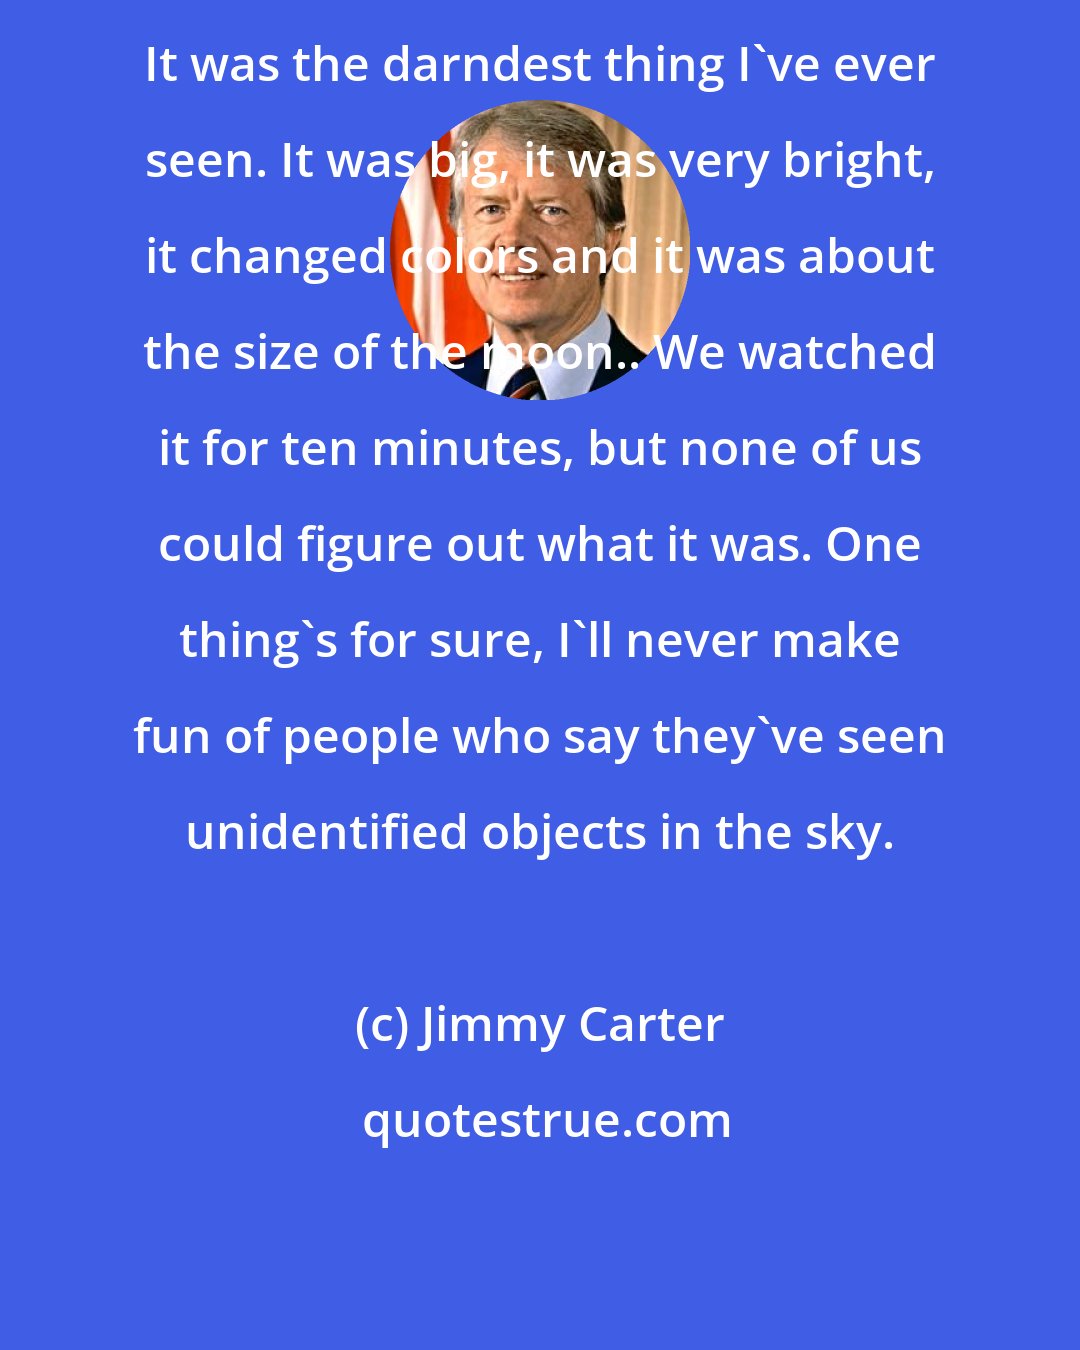 Jimmy Carter: It was the darndest thing I've ever seen. It was big, it was very bright, it changed colors and it was about the size of the moon.. We watched it for ten minutes, but none of us could figure out what it was. One thing's for sure, I'll never make fun of people who say they've seen unidentified objects in the sky.